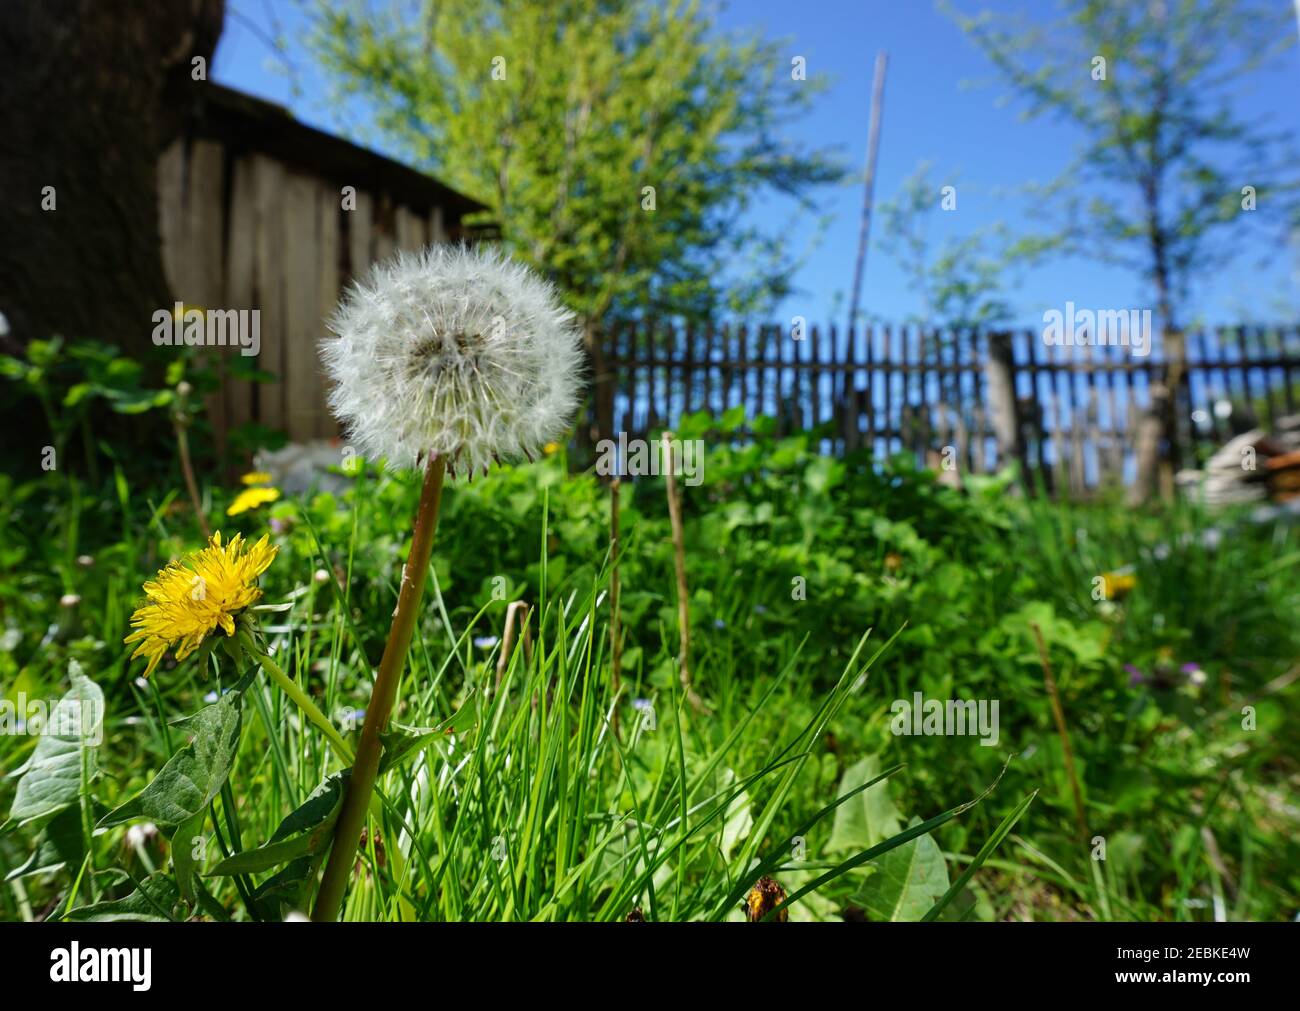 Common dandelion, well known for its yellow flower heads that turn into round balls of silver-tufted fruits that disperse in the wind Stock Photo